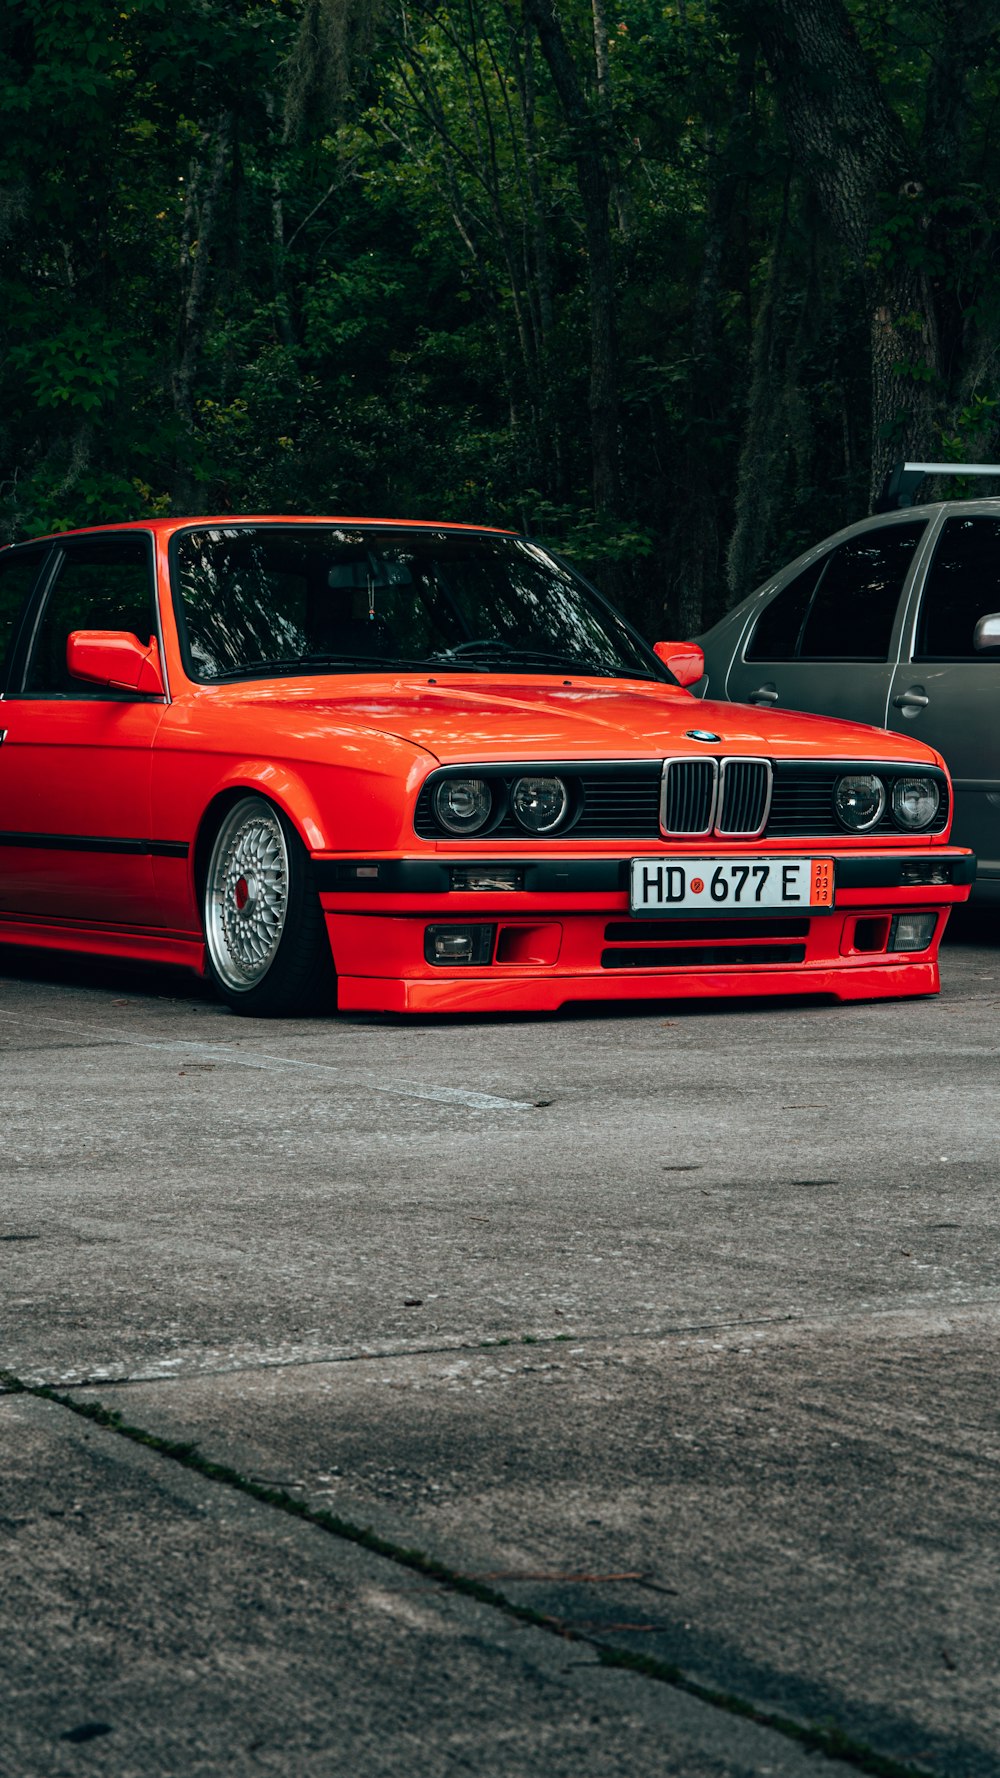 a red bmw is parked in a parking lot